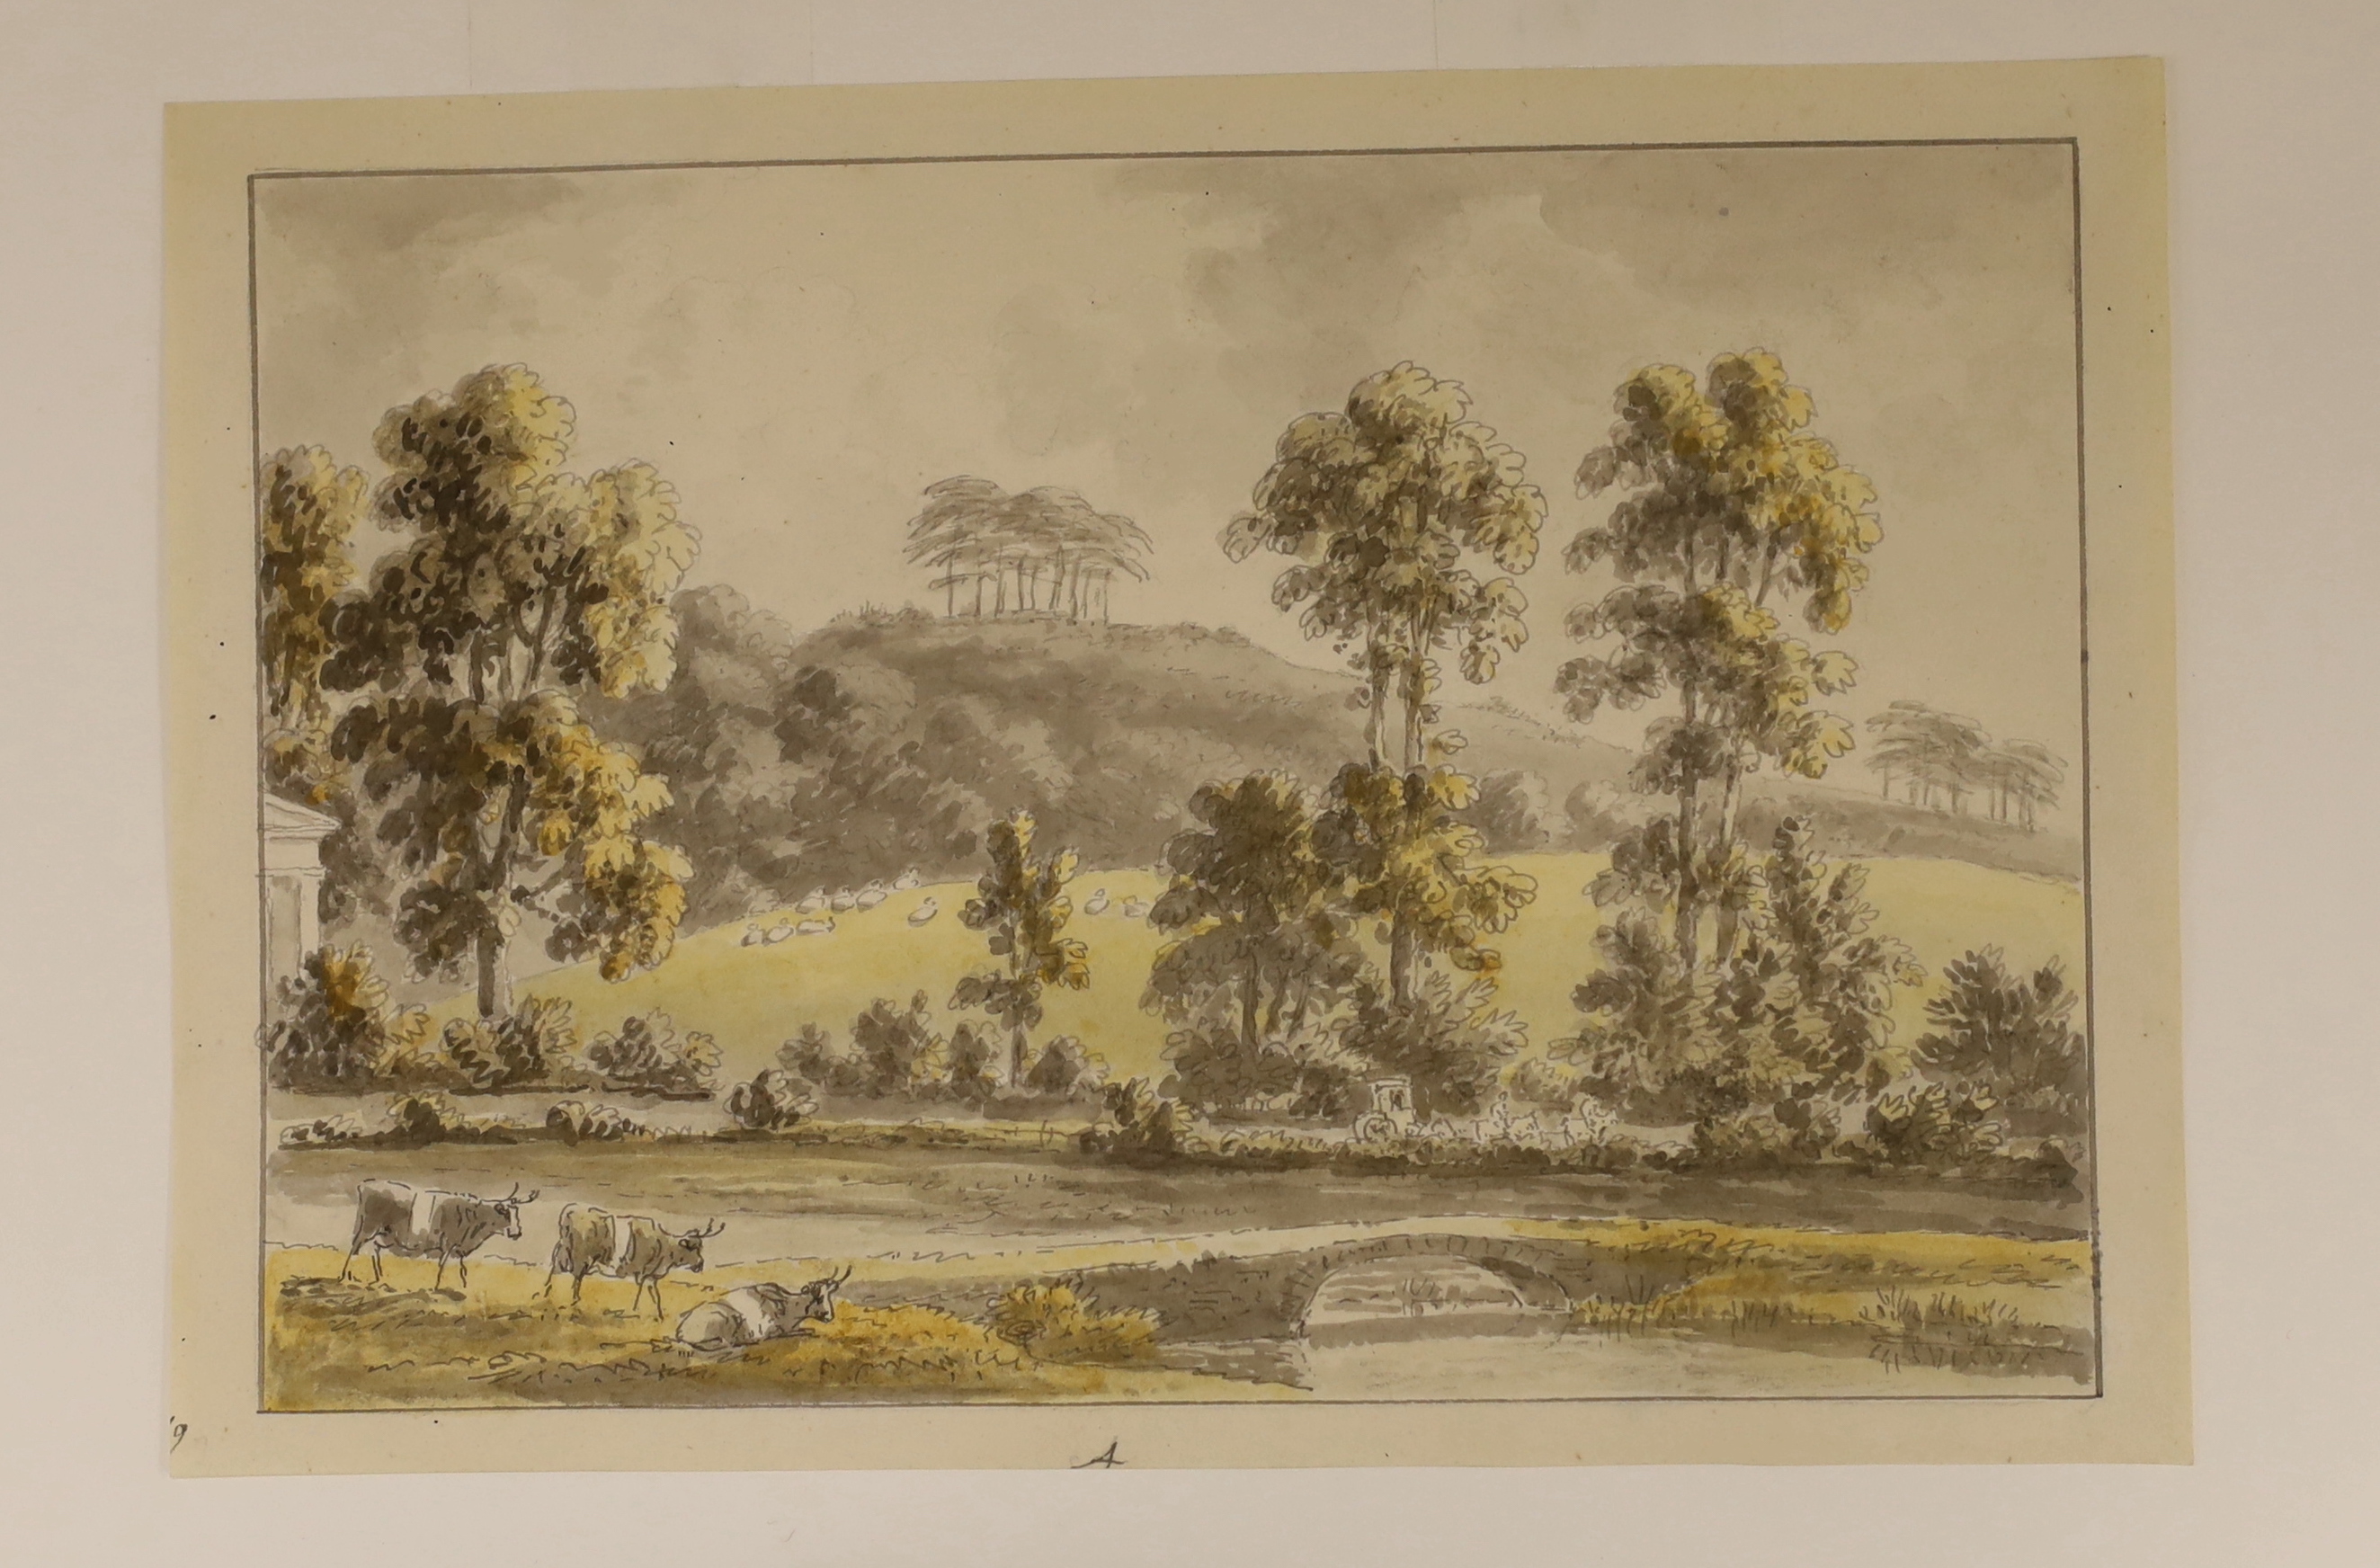 Late 18th/early 19th century ink and watercolour on paper, river landscape with cattle, mounted, unframed, 21cm x 14cm